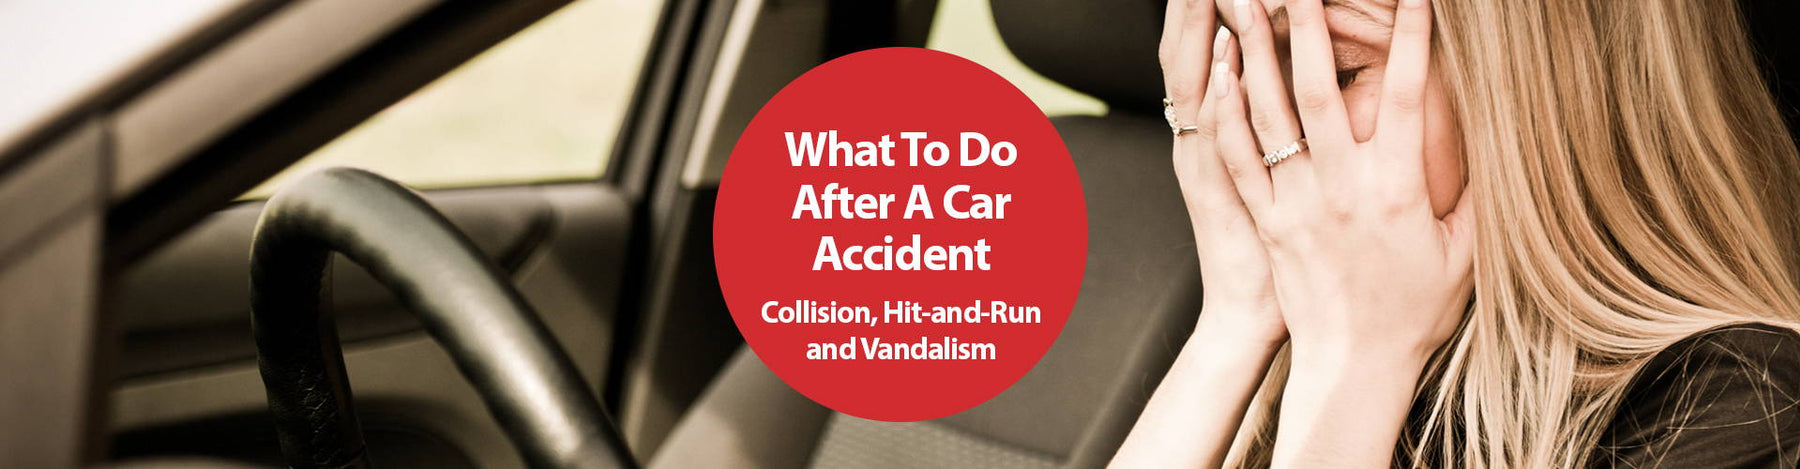 What to do immediately after  a car accident or hit-and-run | BlackboxMyCar